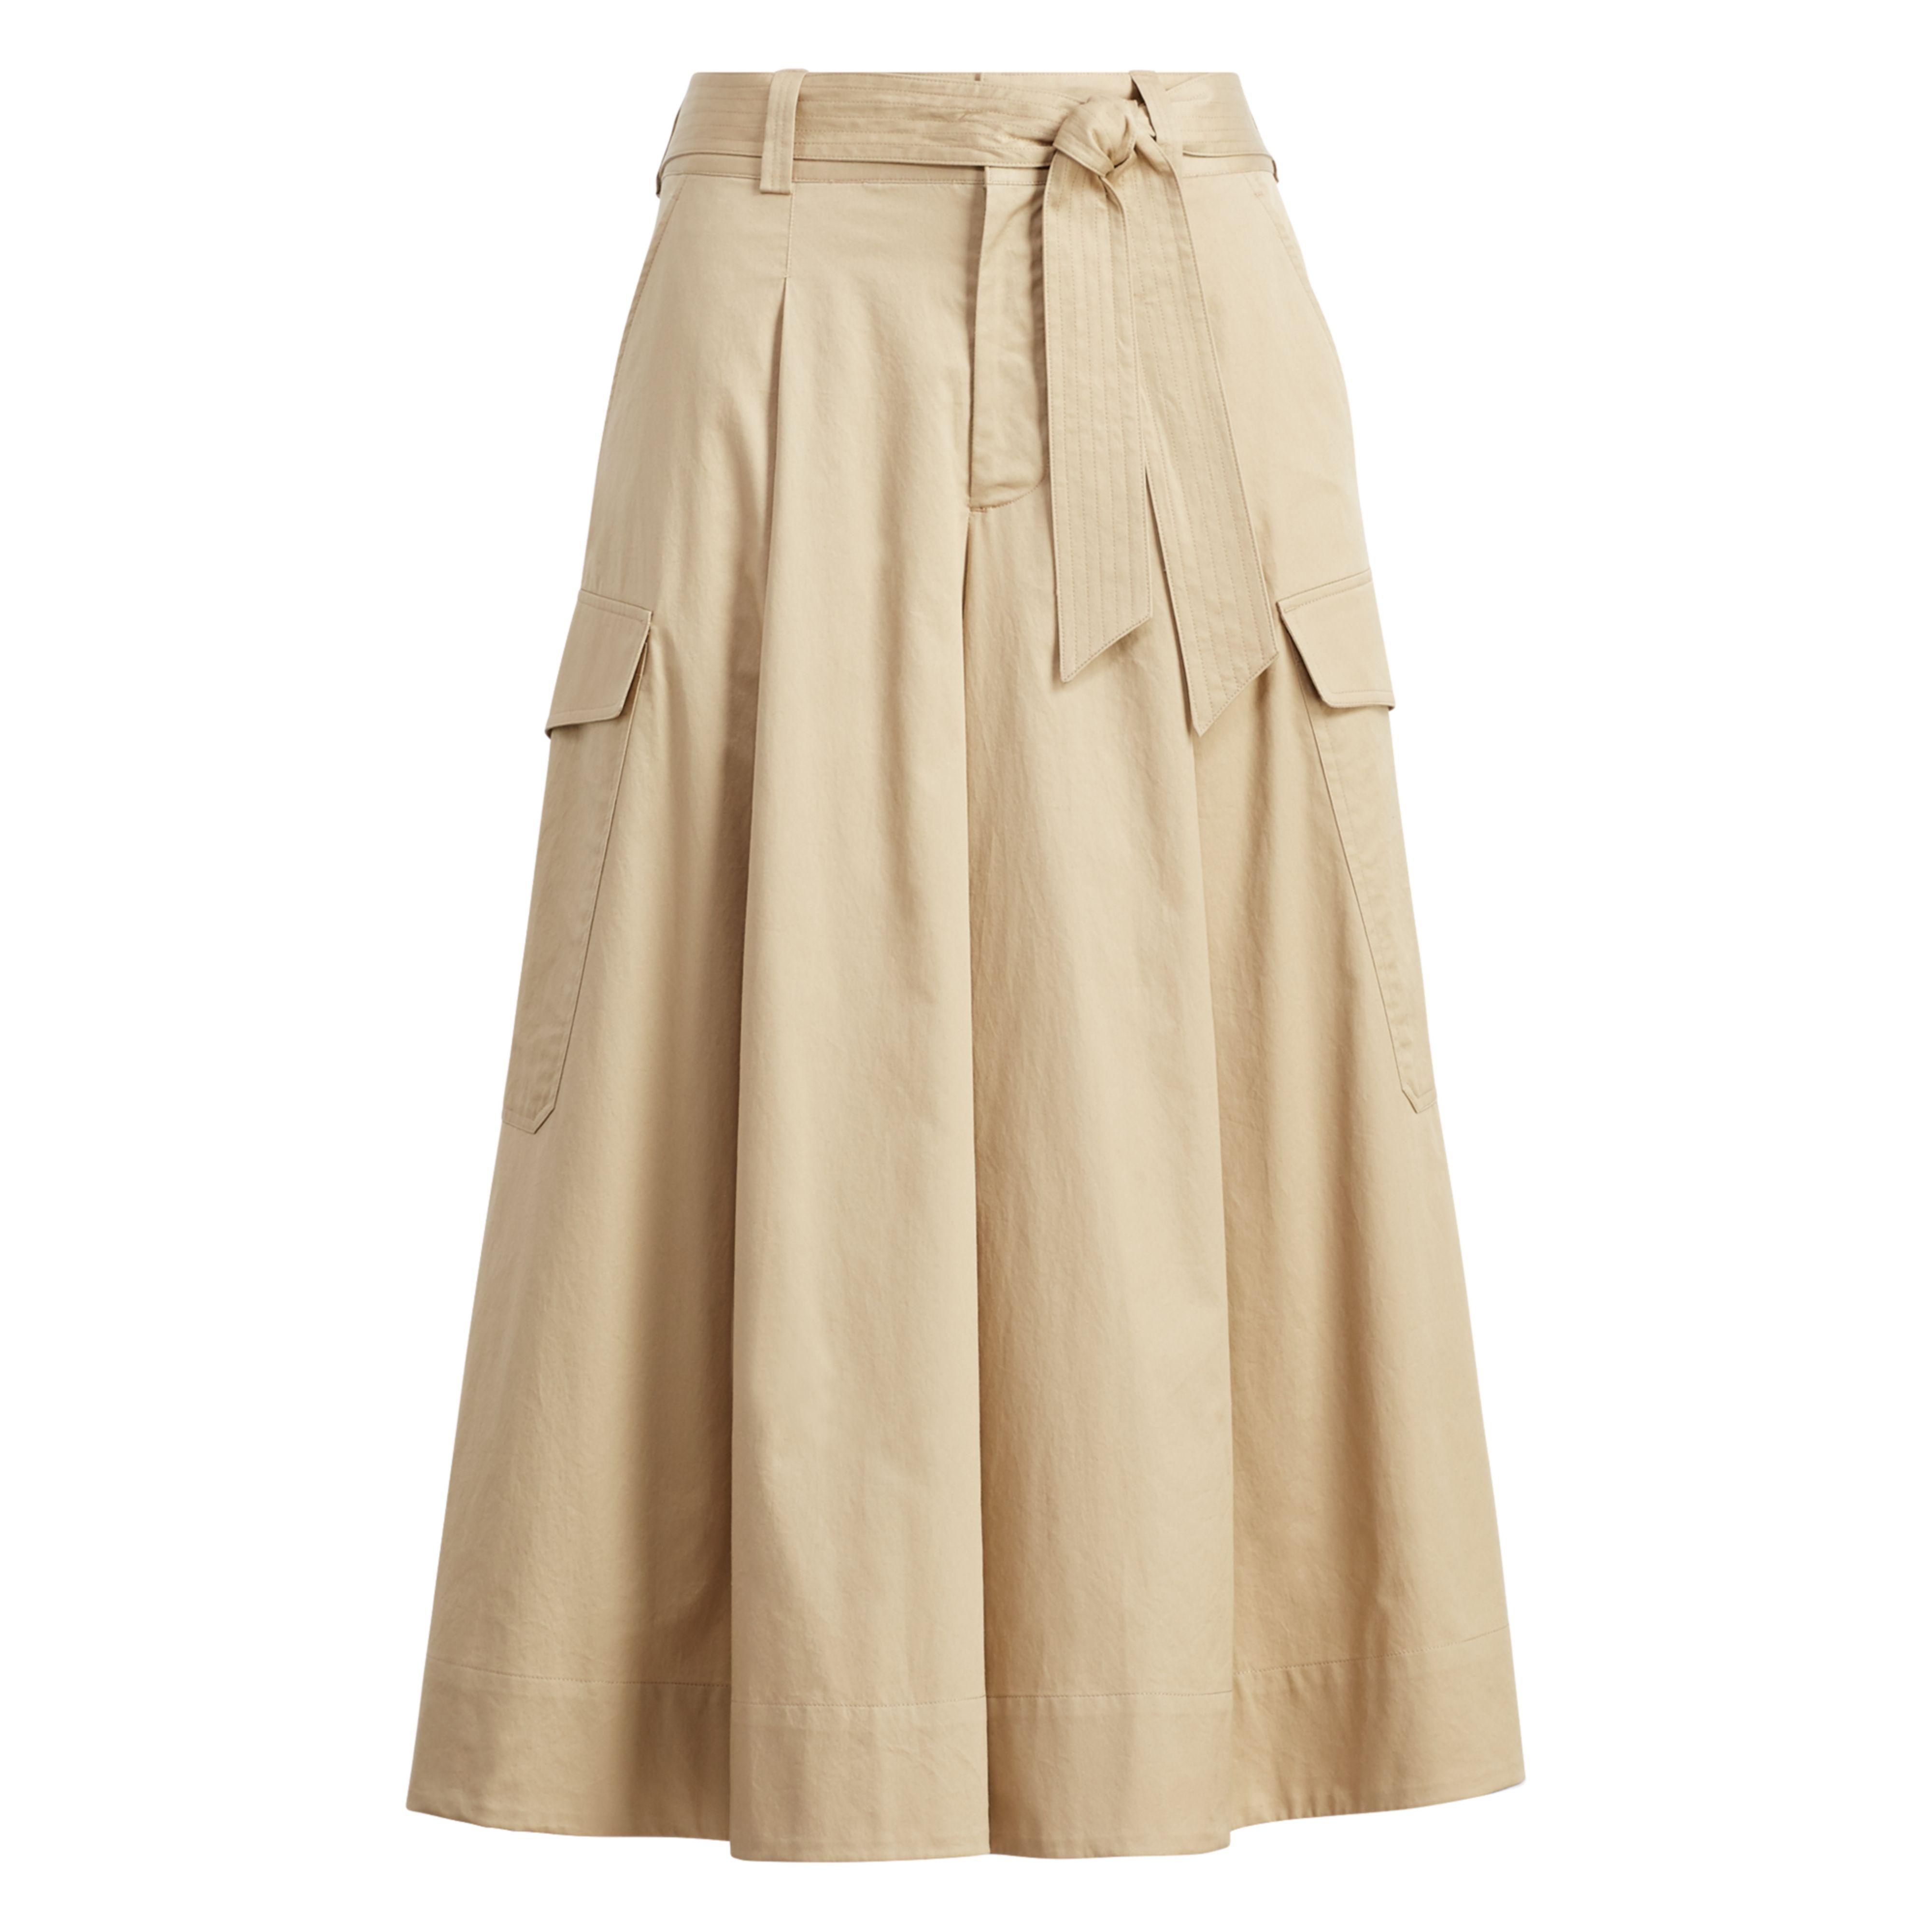 Polo Ralph Lauren Cotton Chino Wide-leg Pant in Beige (Natural) - Lyst